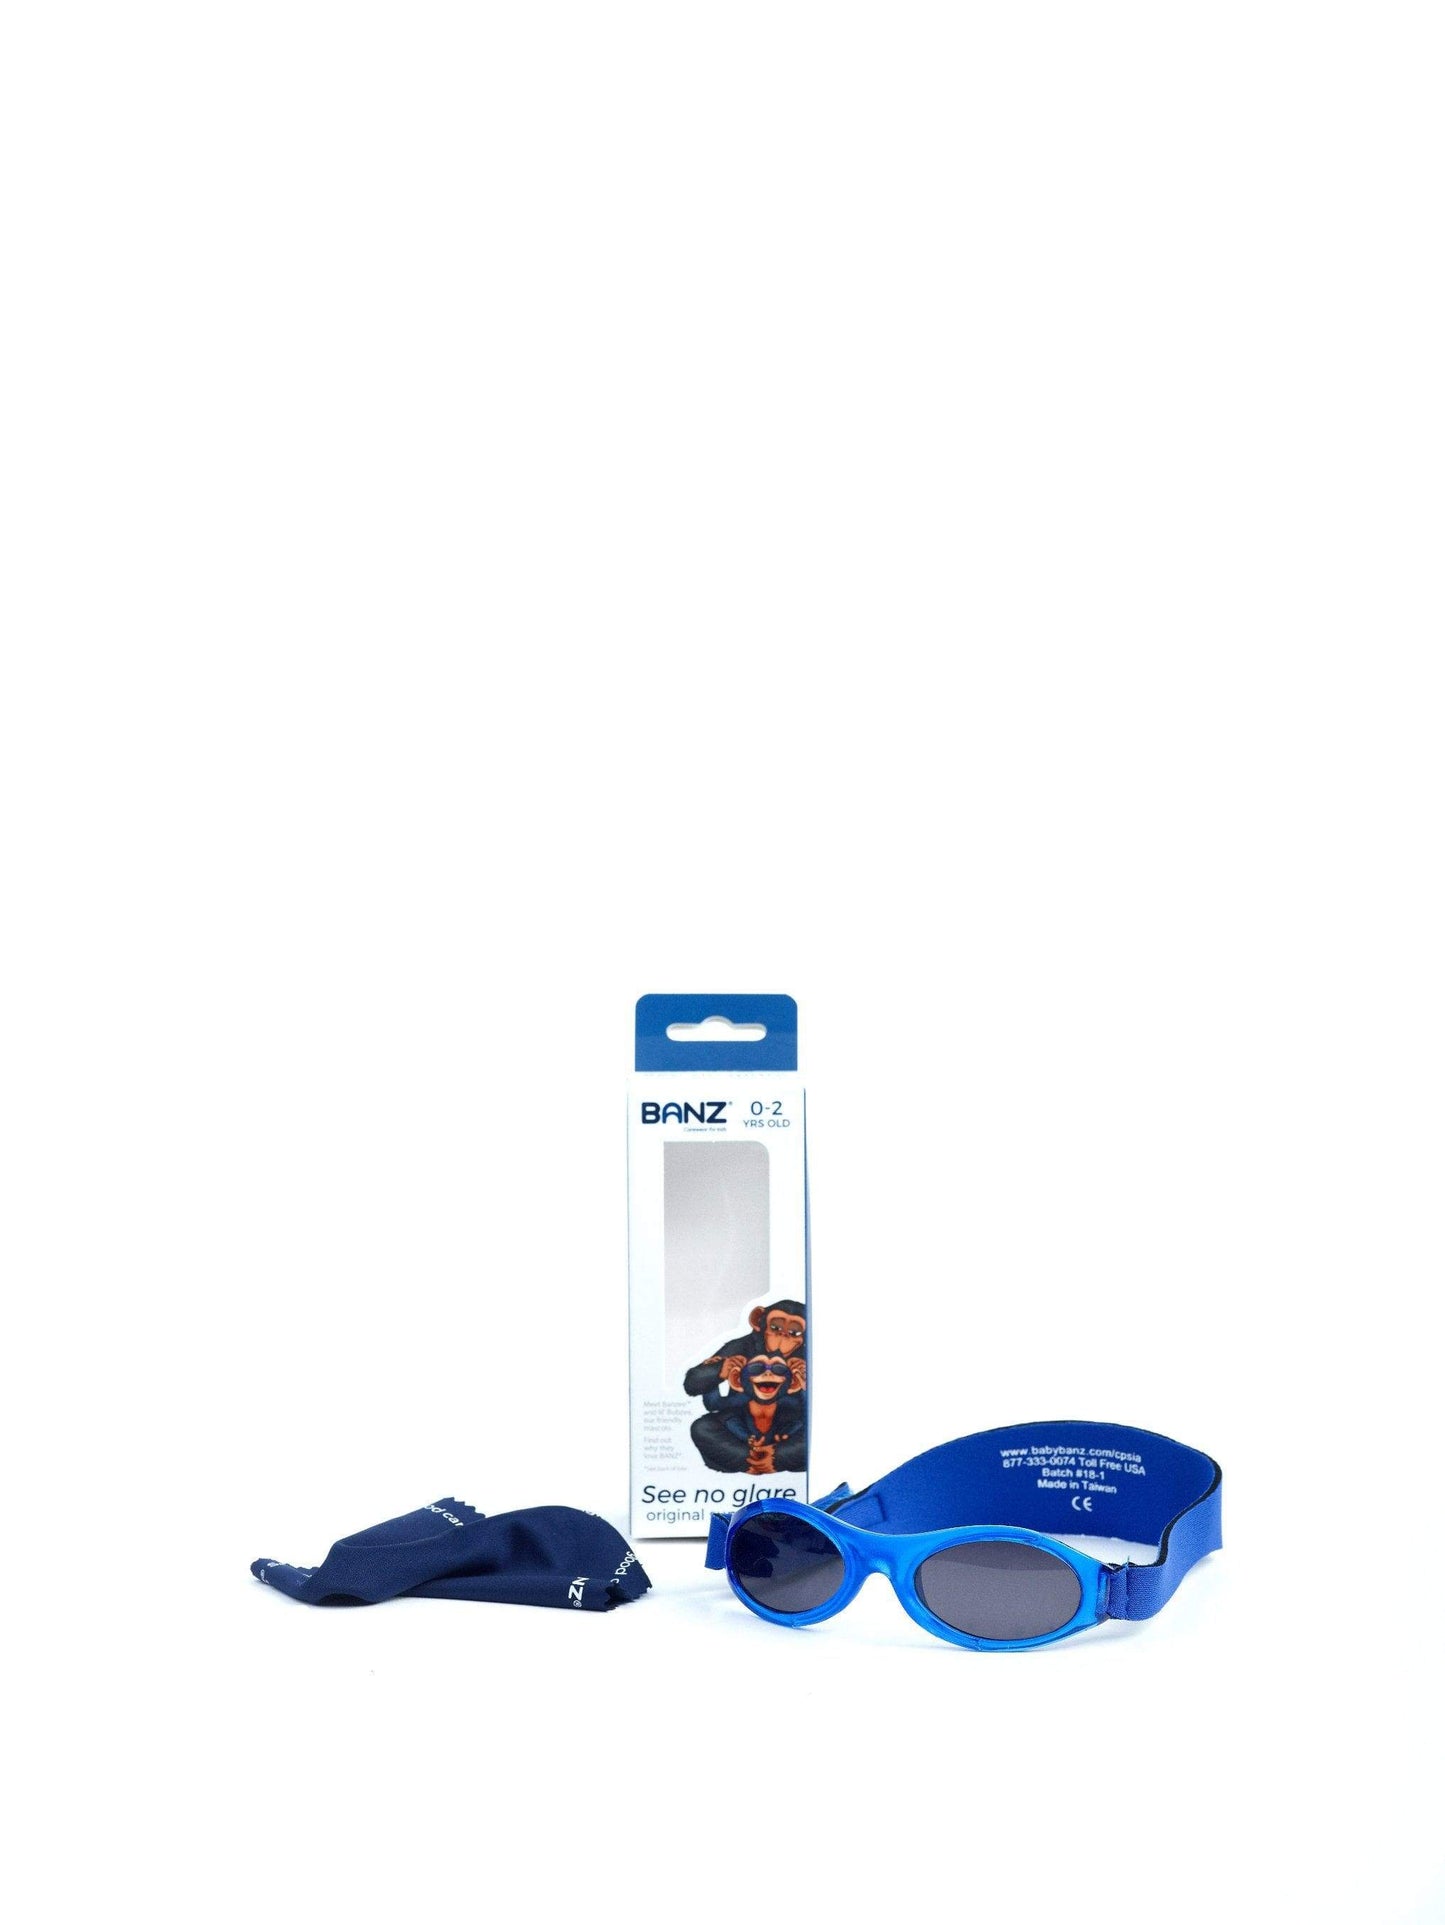 banz wrap around sunglasses, cleaning cloth and box 